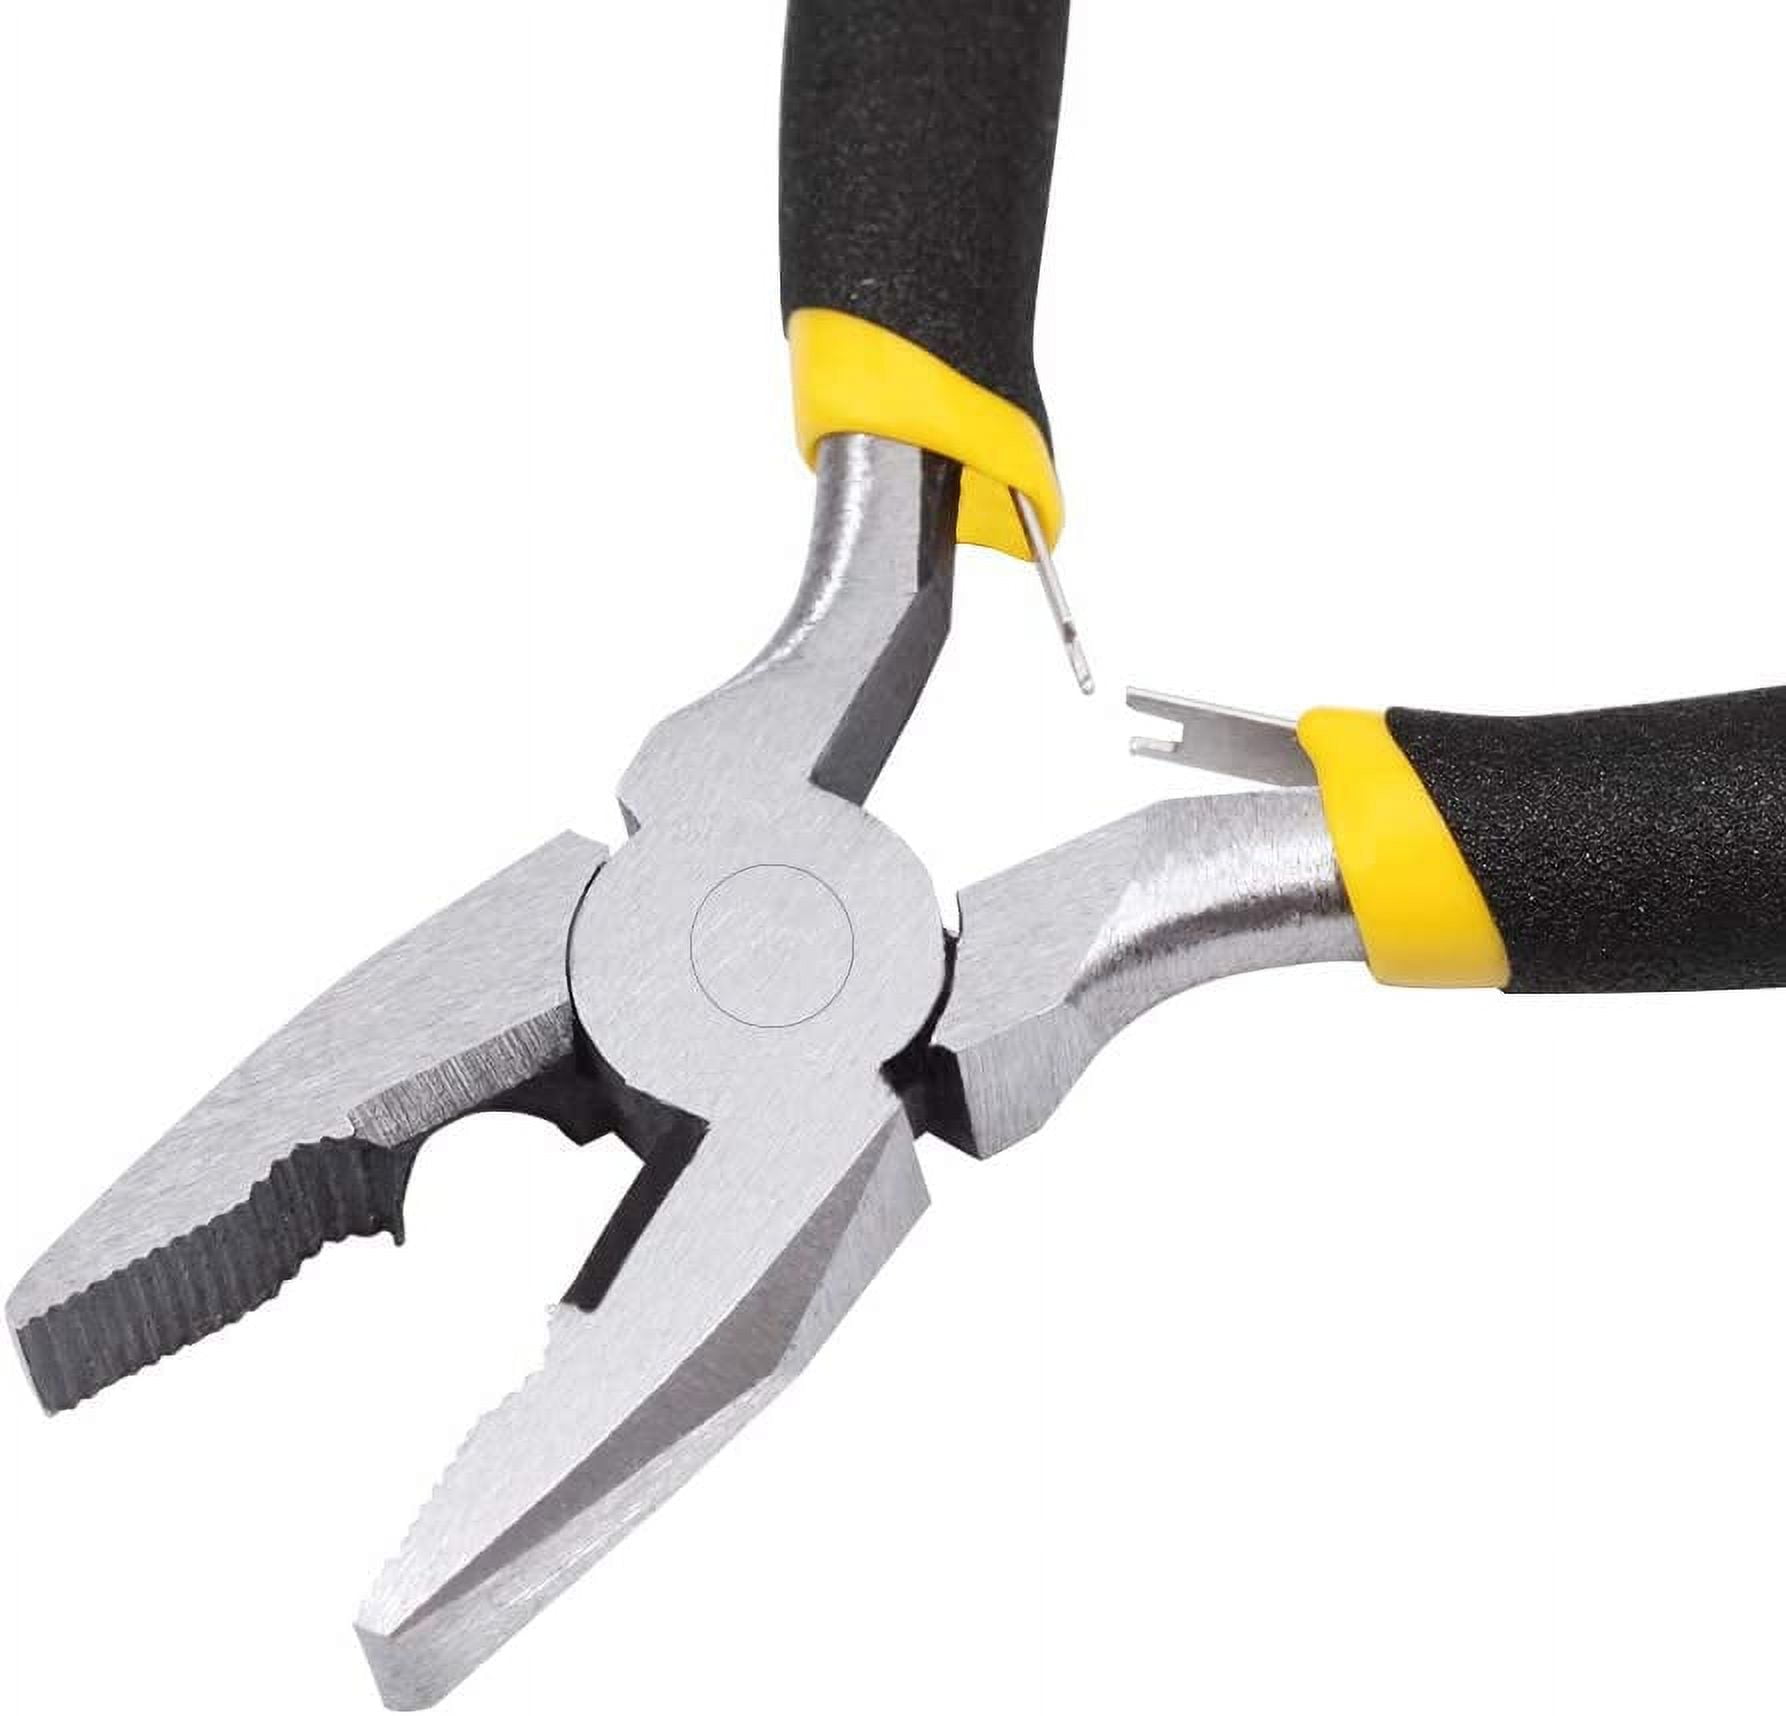 Buy Round Nose Craft Pliers Online. COD. Low Prices. Free Shipping. Premium  Quality.